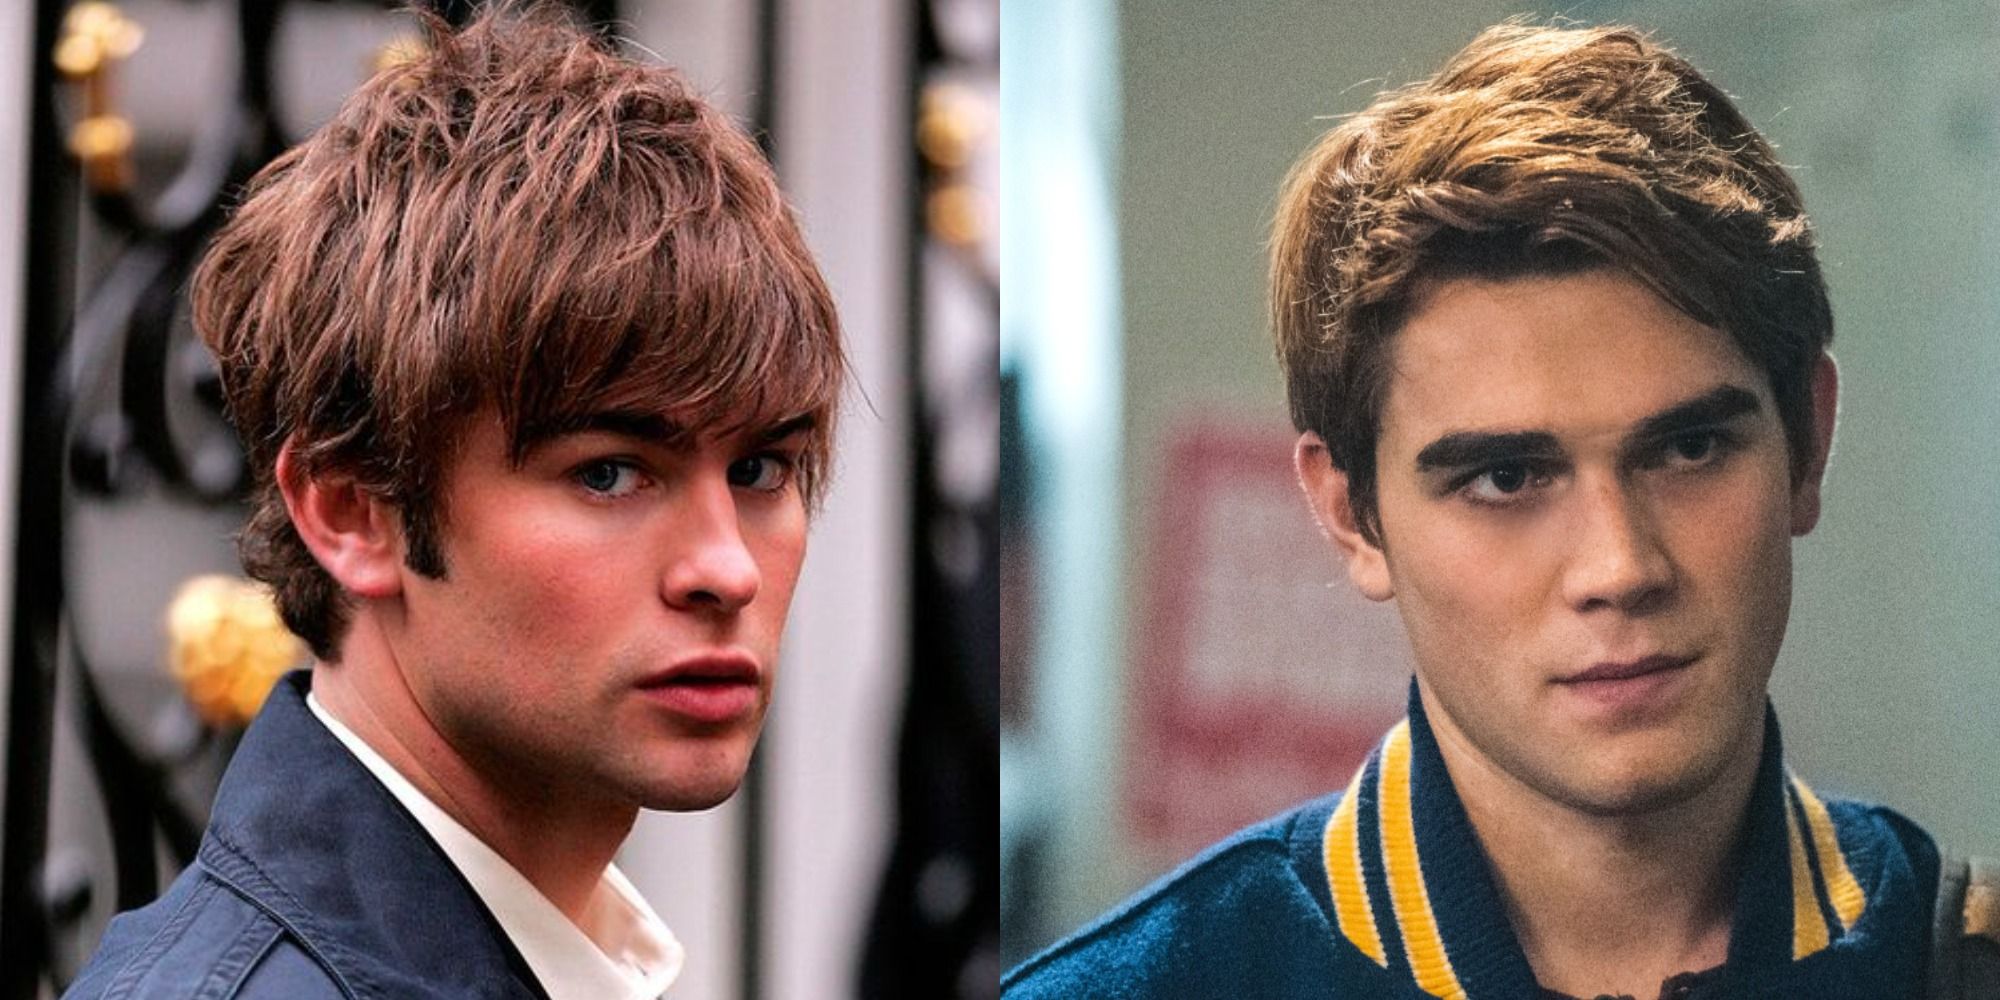 Riverdale: The Main Characters And Their Gossip Girl Counterparts